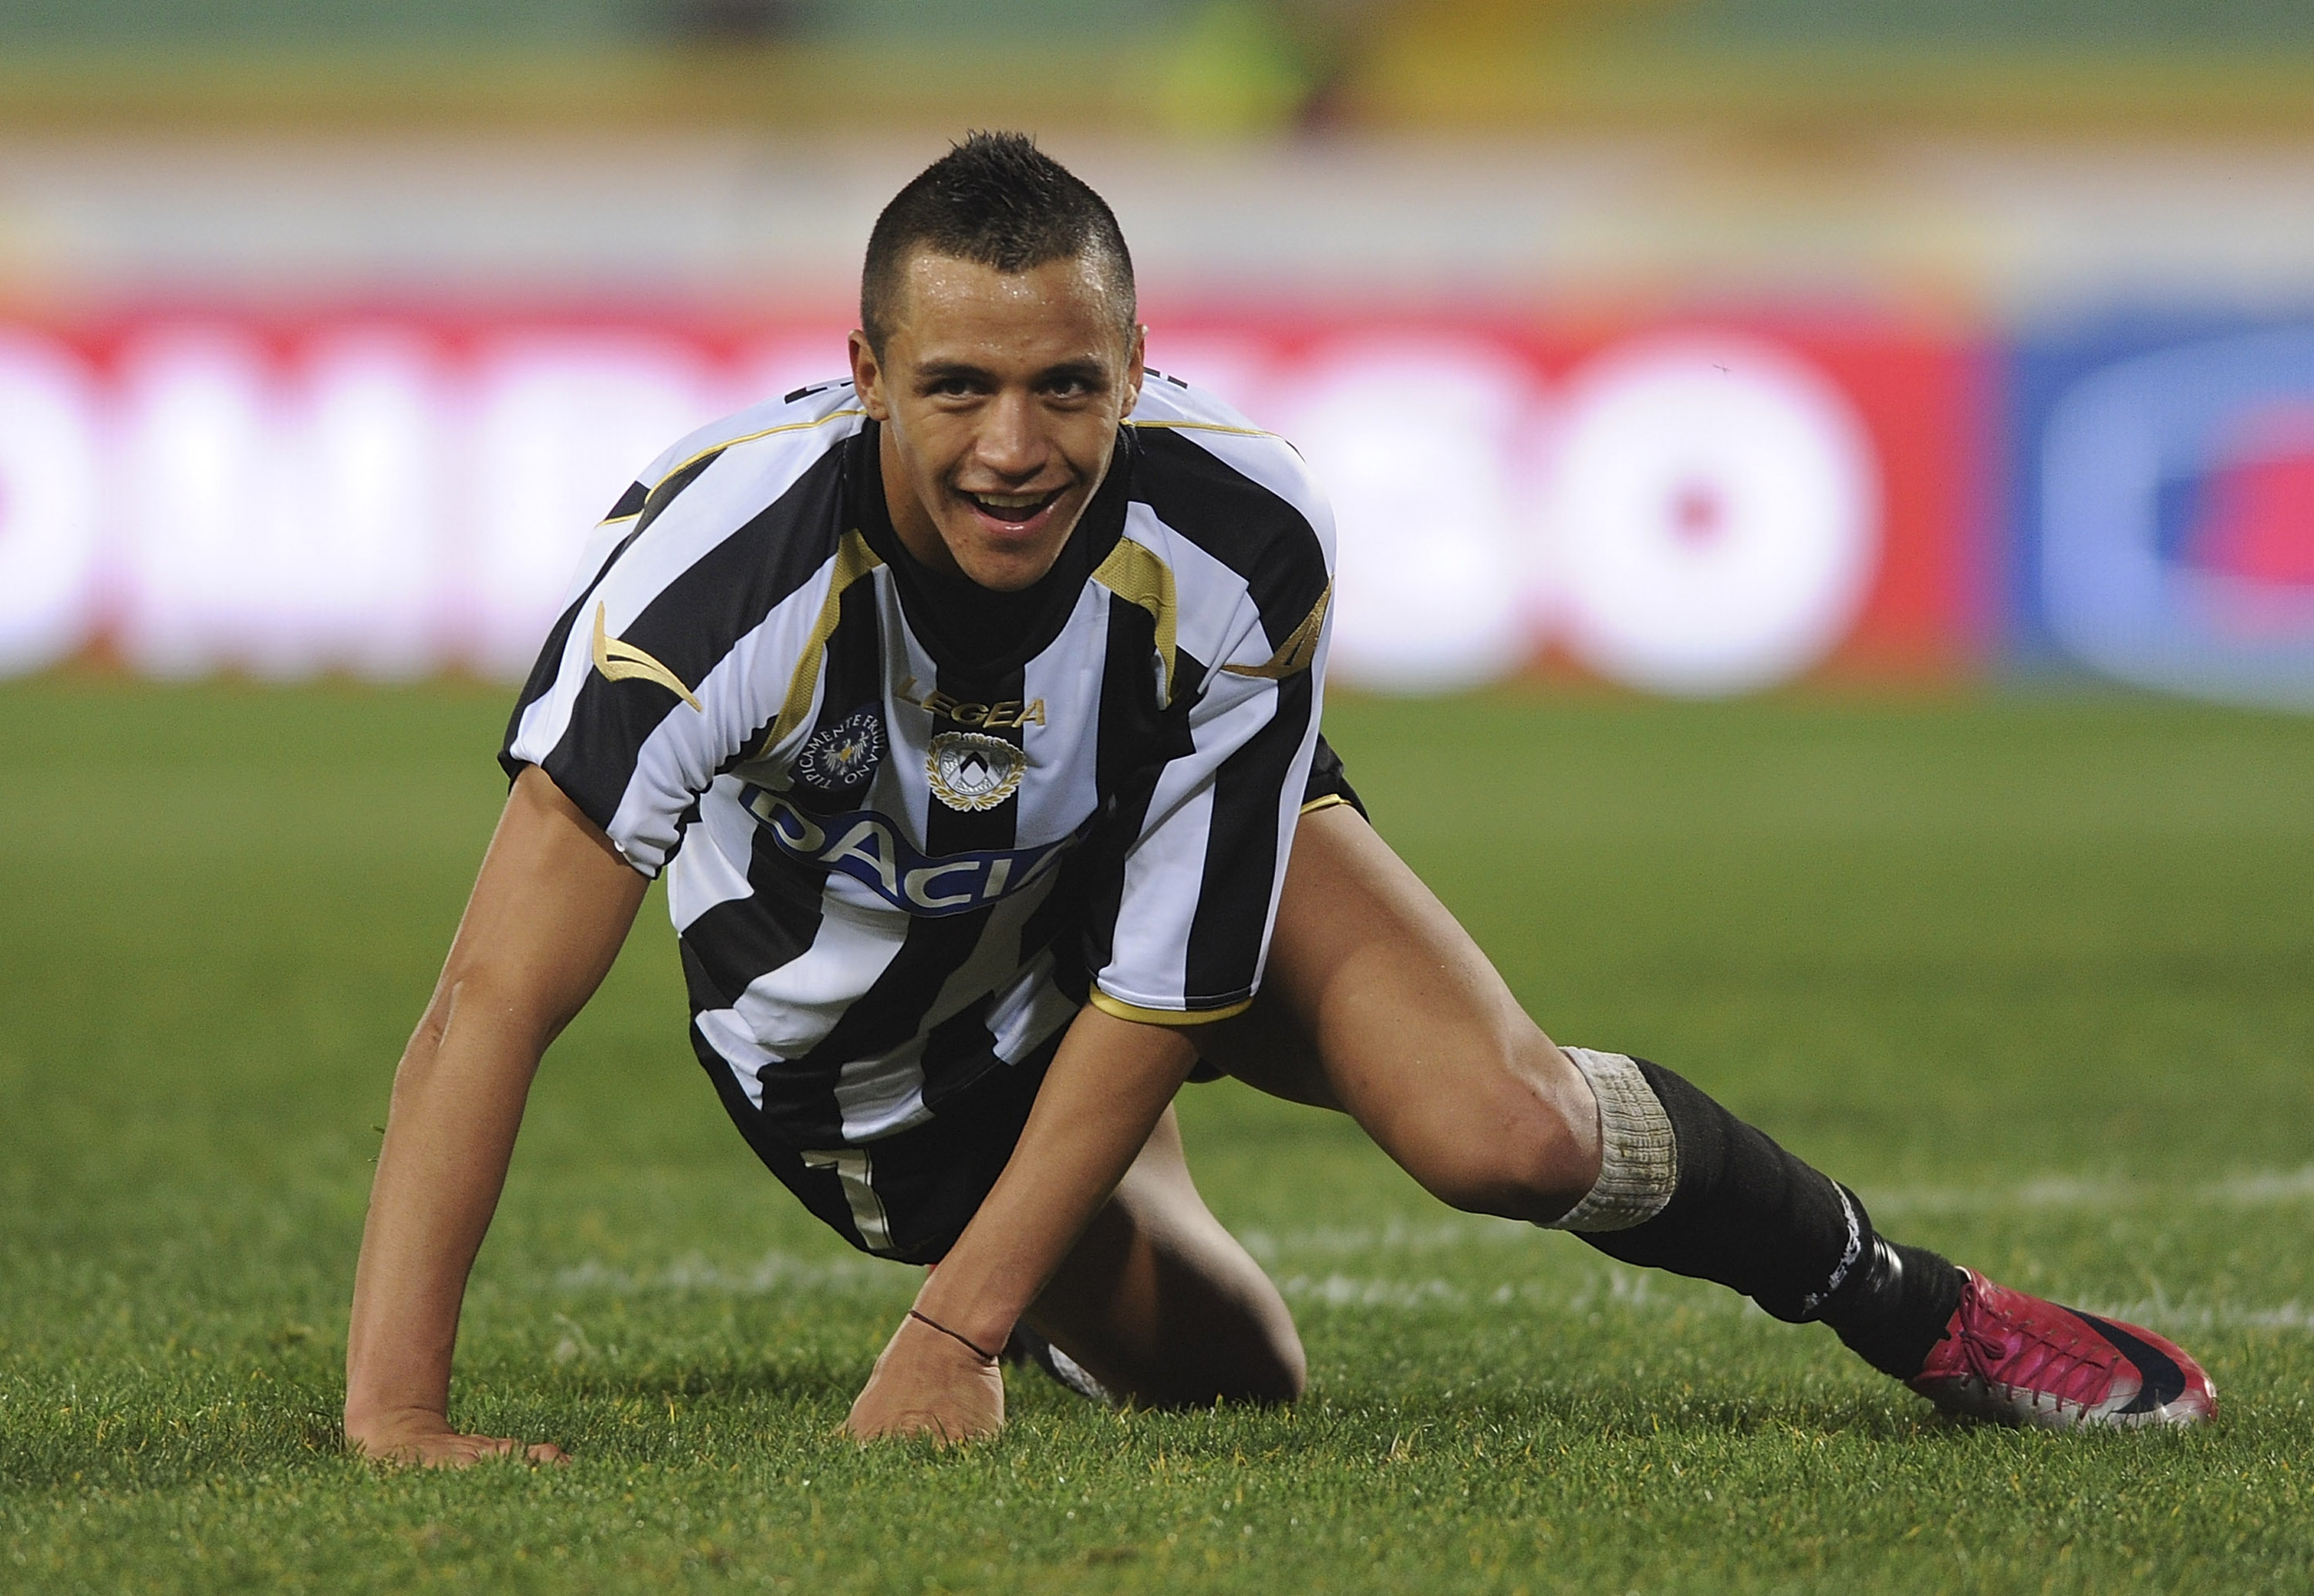 UDINE, ITALY - NOVEMBER 14:  Alexis Alejandro Sanchez of Udinese looks on during the Serie A match between Udinese and Lecce at Stadio Friuli on November 14, 2010 in Udine, Italy.  (Photo by Dino Panato/Getty Images)